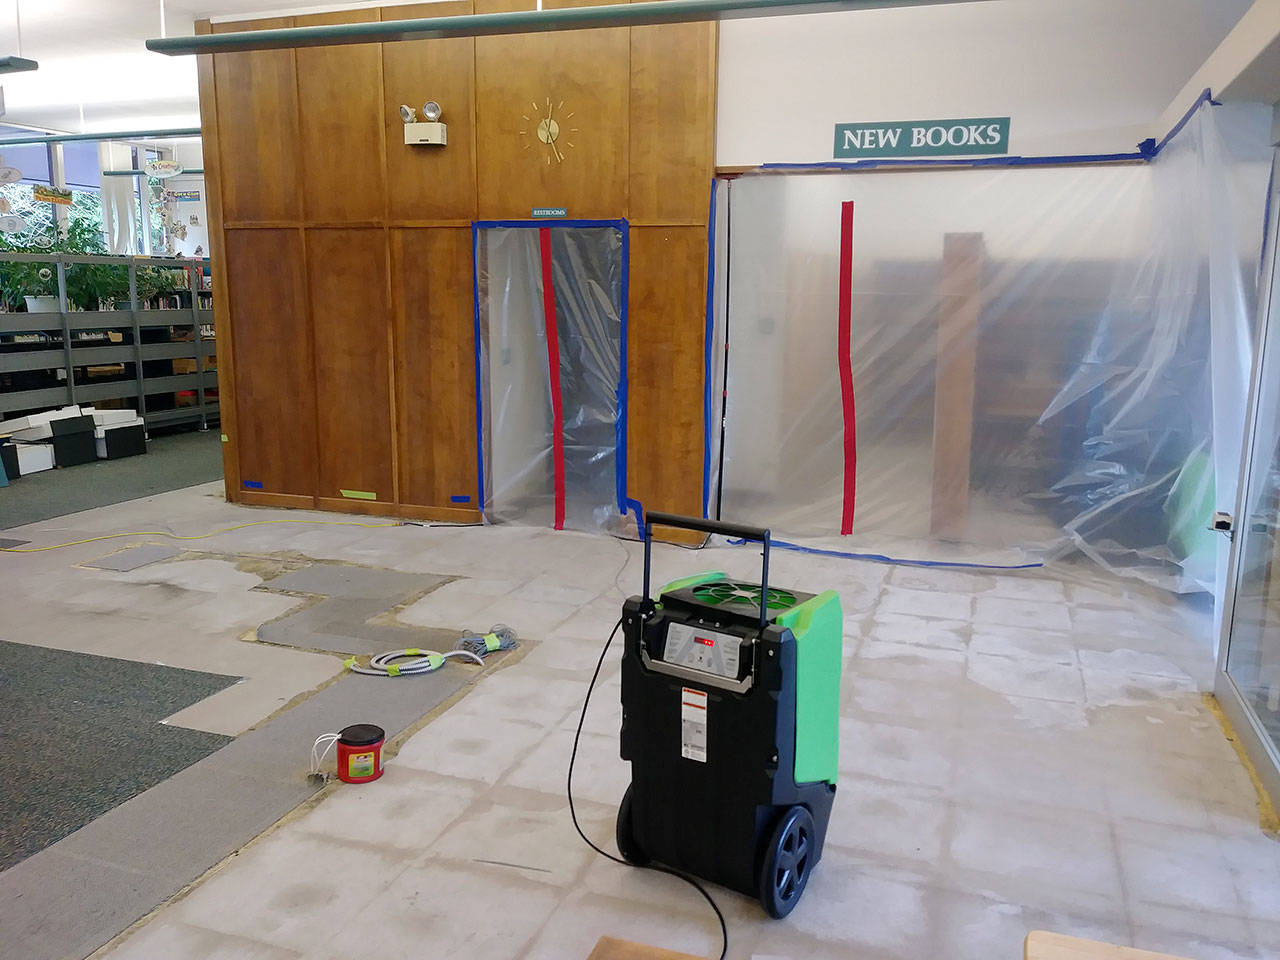 Plastic sheeting blocks off portions of the main floor of the Montesano library Friday, Dec. 15, 2018, in Montesano, Washington. Flooding Dec. 11 damaged wall boards, carpeting and the main entryway desk. Because of asbestos abatement and other repair work that needs to be done, the Timberland Regional Library system, which owns the building, does not know when the building will be reopened.